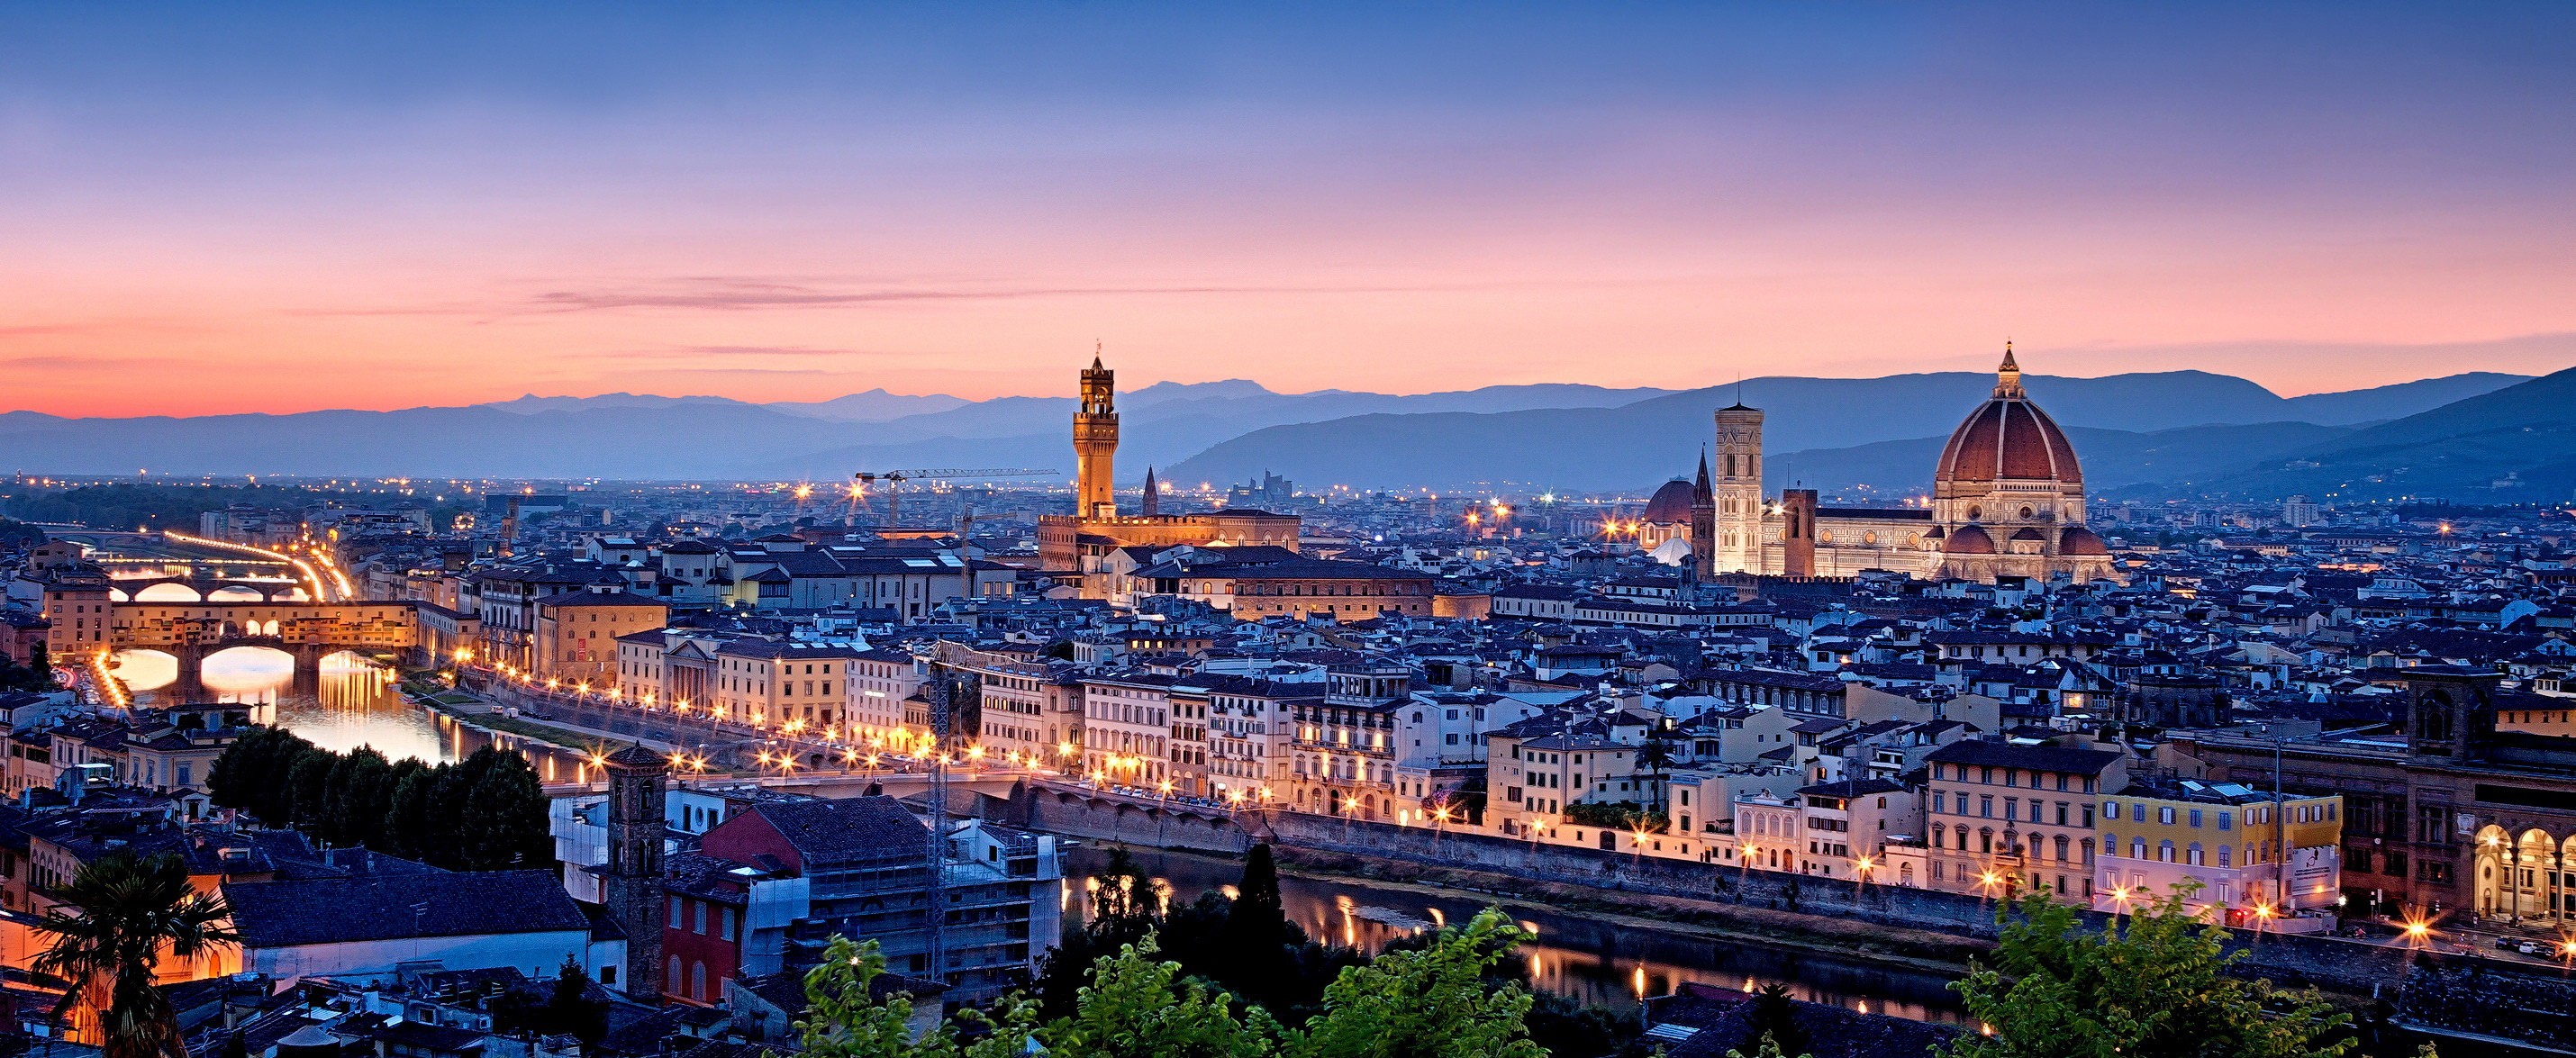 tuscany, italy, florence, man made, cities